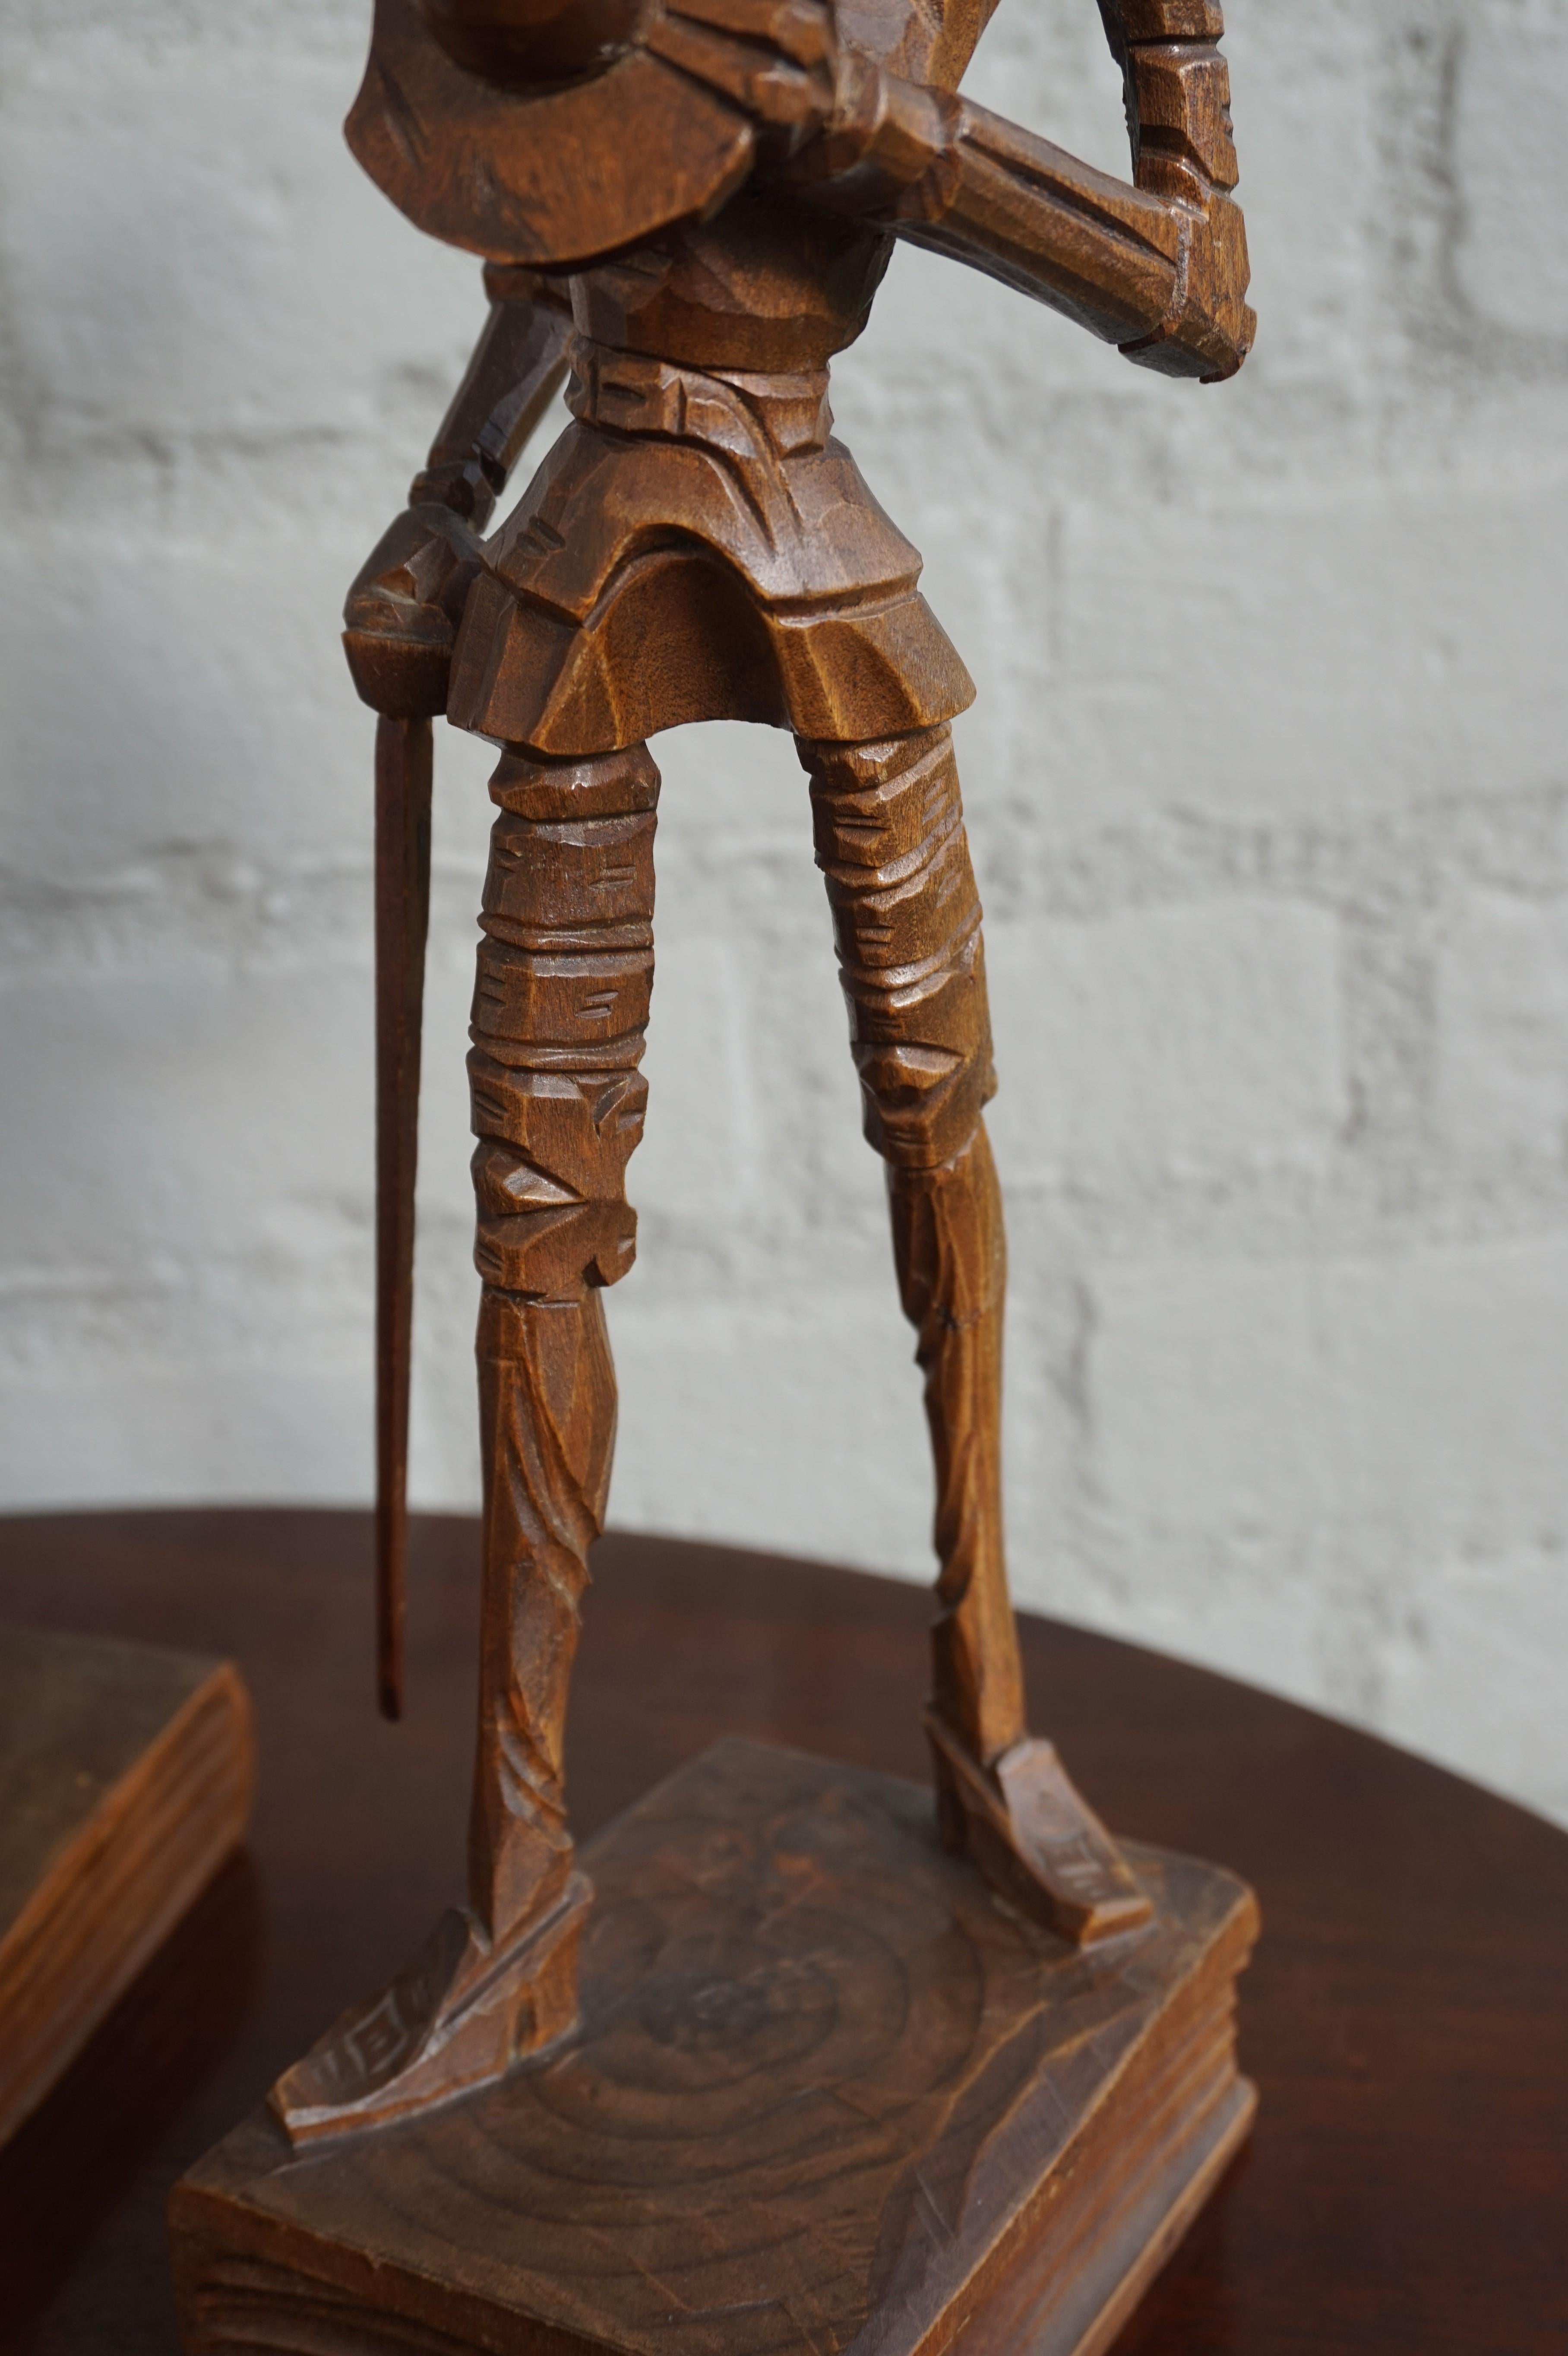 Renaissance Hand Carved Don Quixote and Sancho Panza Sculptures from the Arts & Crafts Era